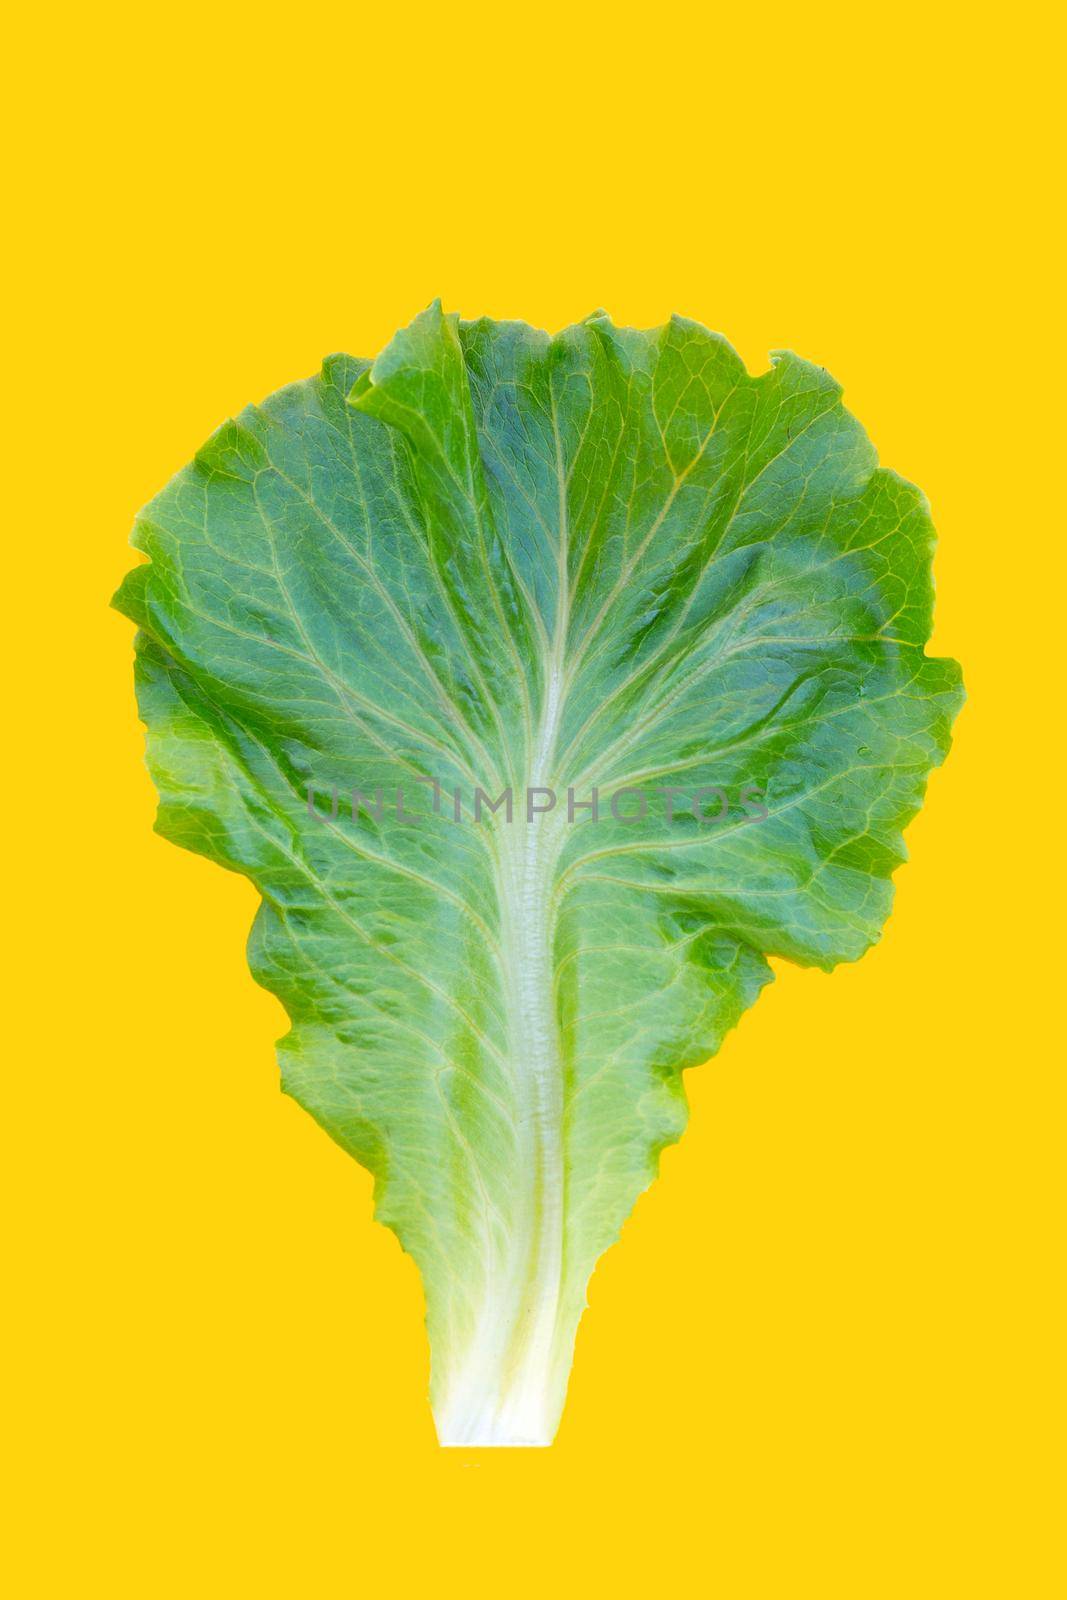 Lettuce leaf on yellow background.